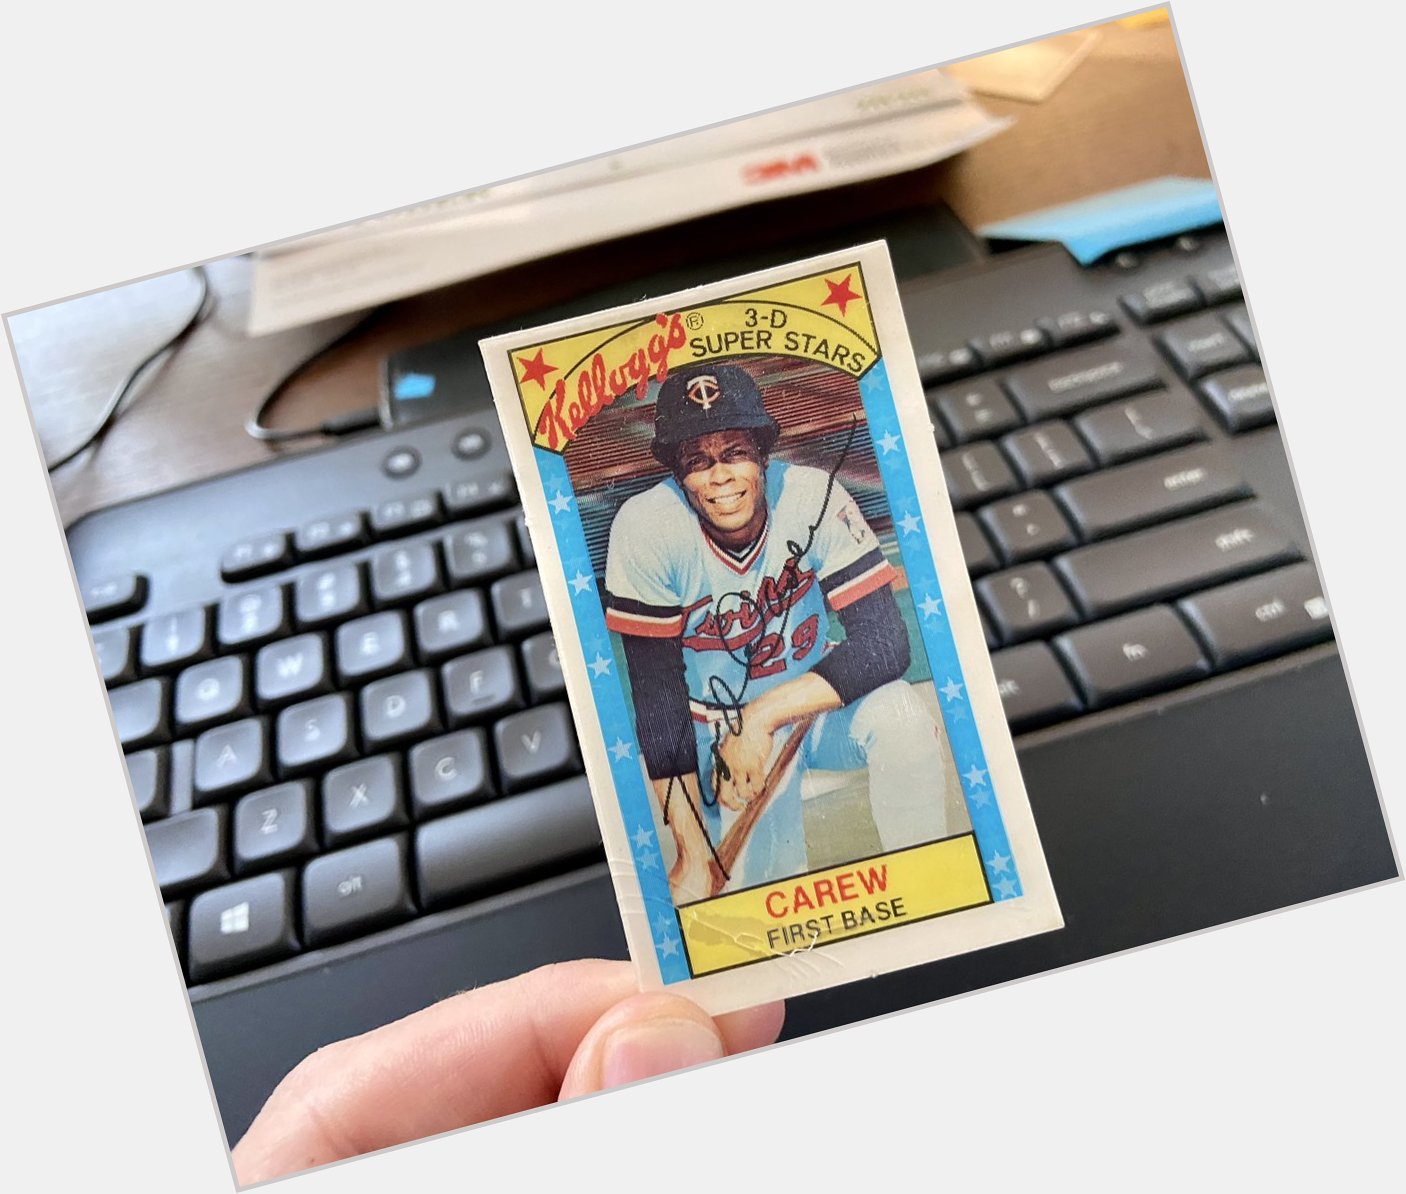 I got my first baseball card in a box of cereal in 1979. Happy birthday Rod Carew! 